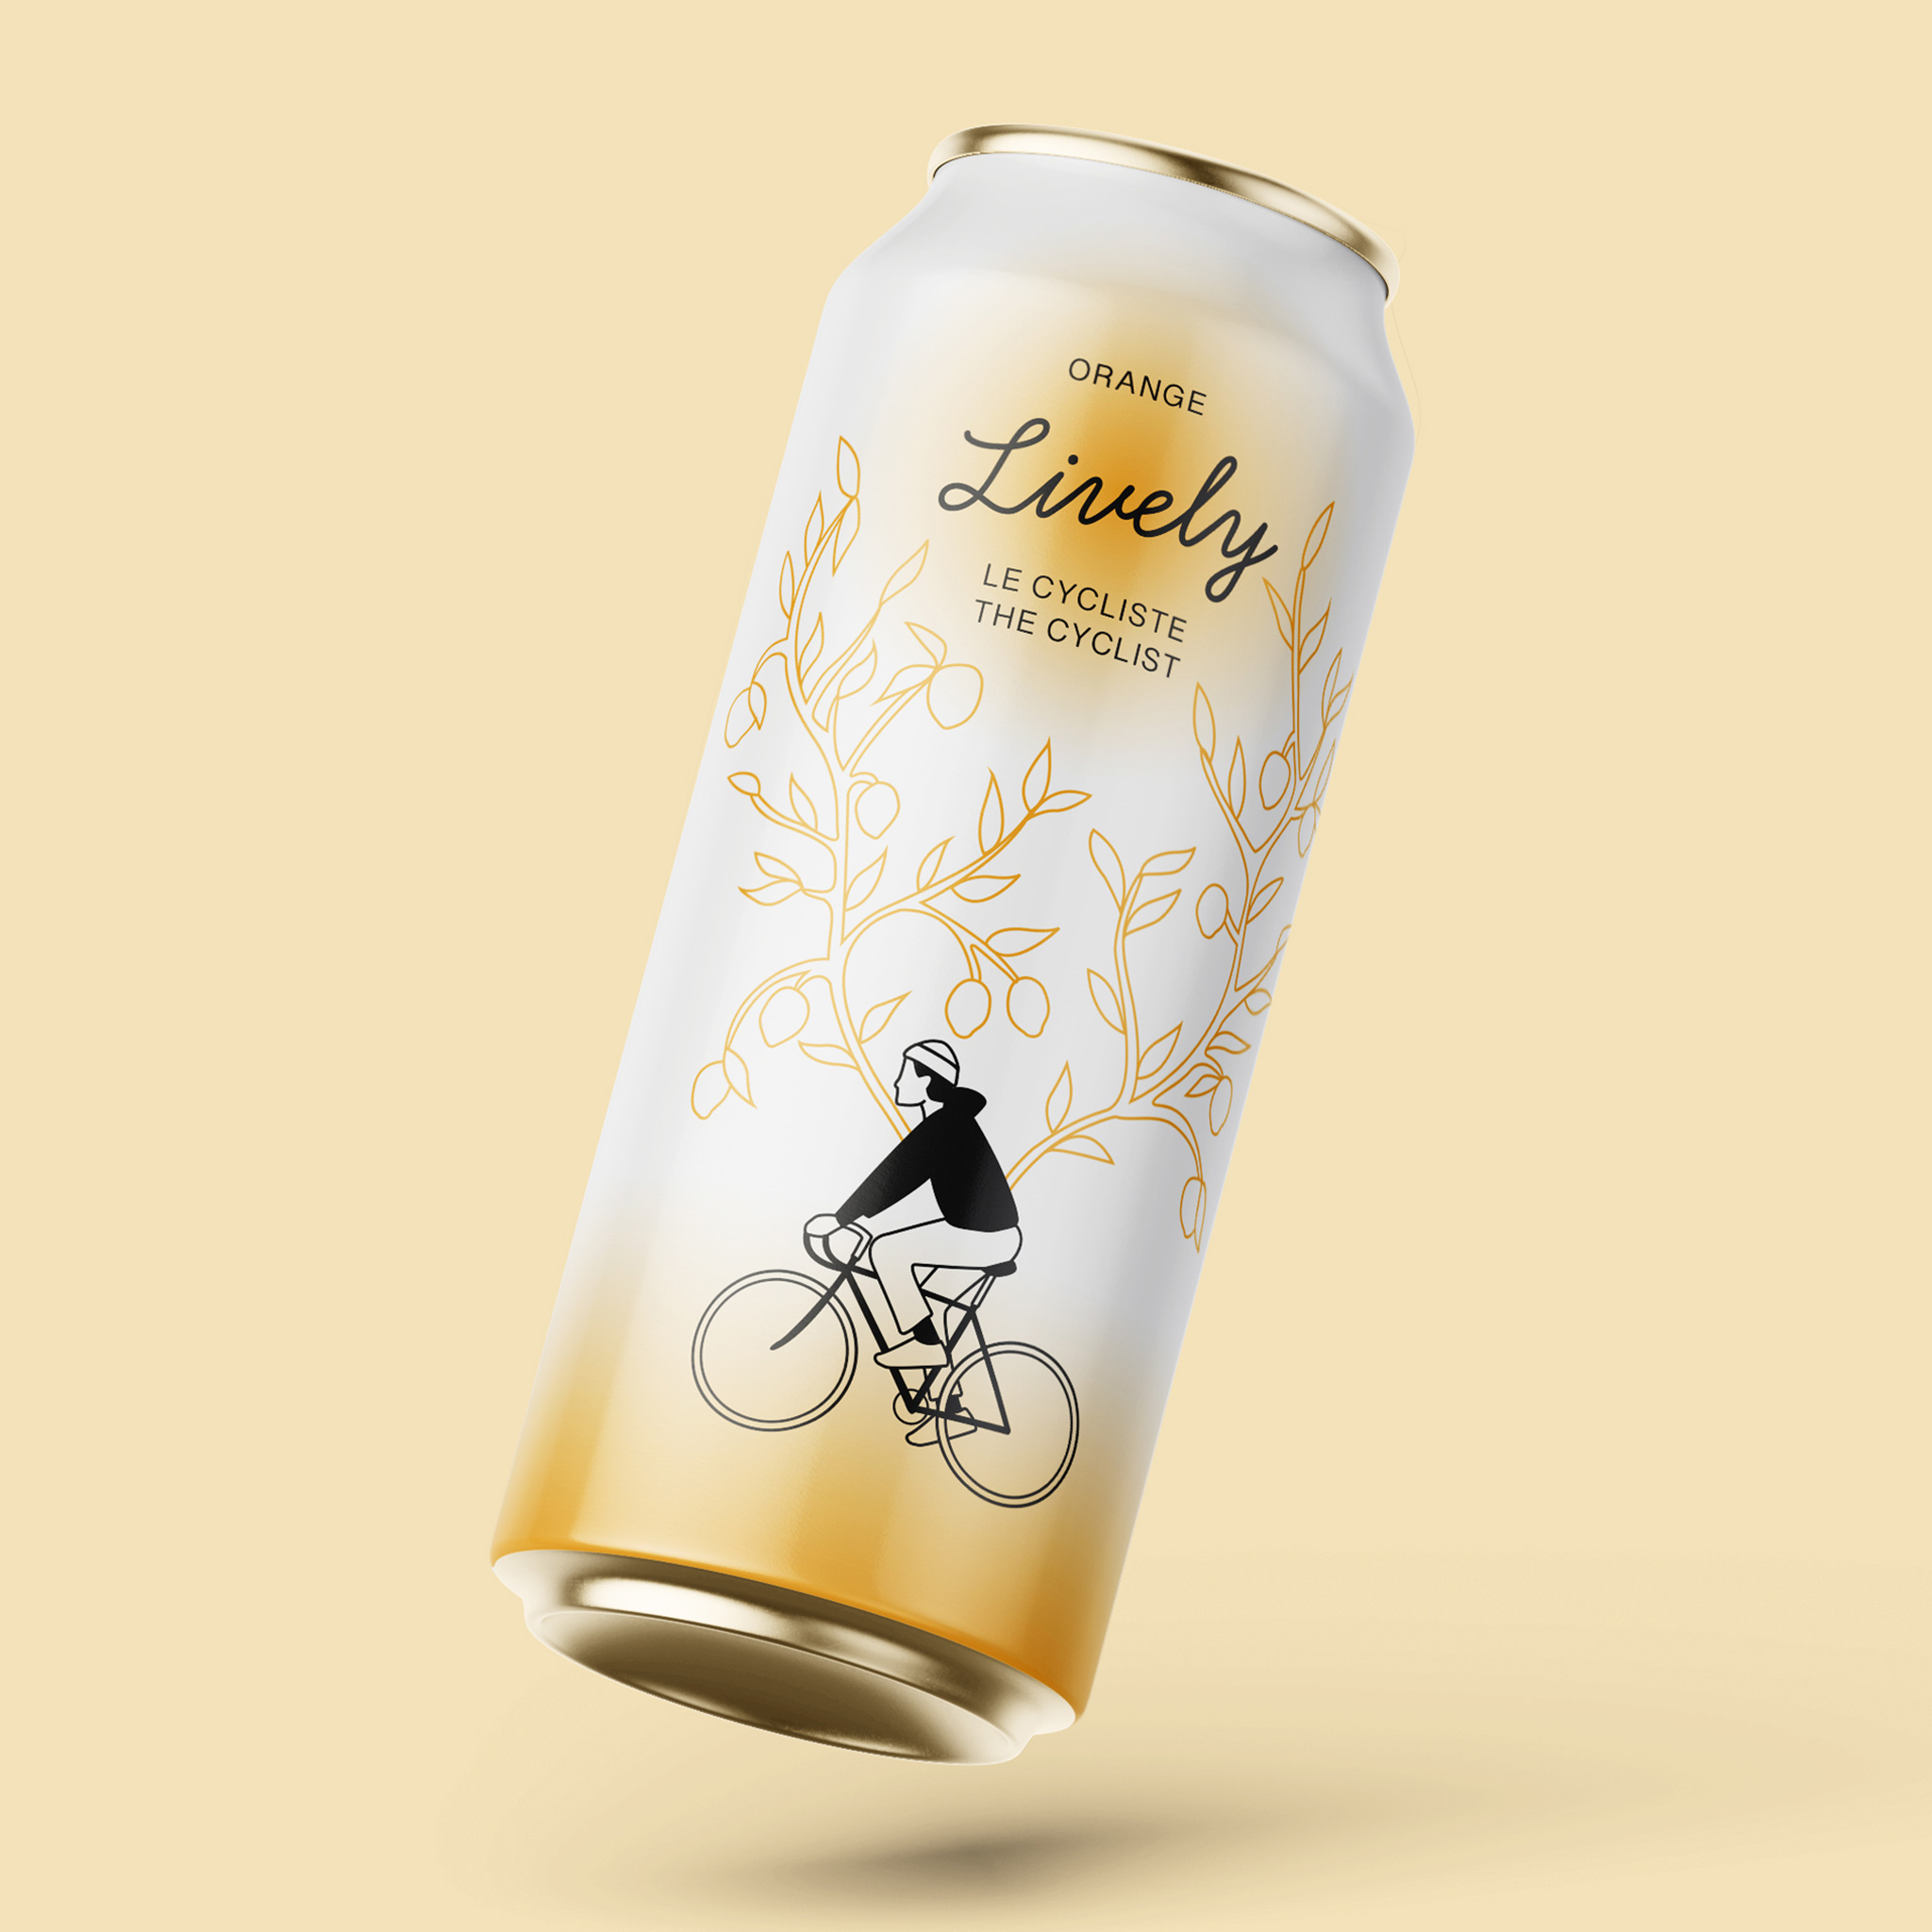 Mockup of packaging design for an imagined all-natural energy drink. This image is an example of a goal, more precisely, of what I would like to create in my career.